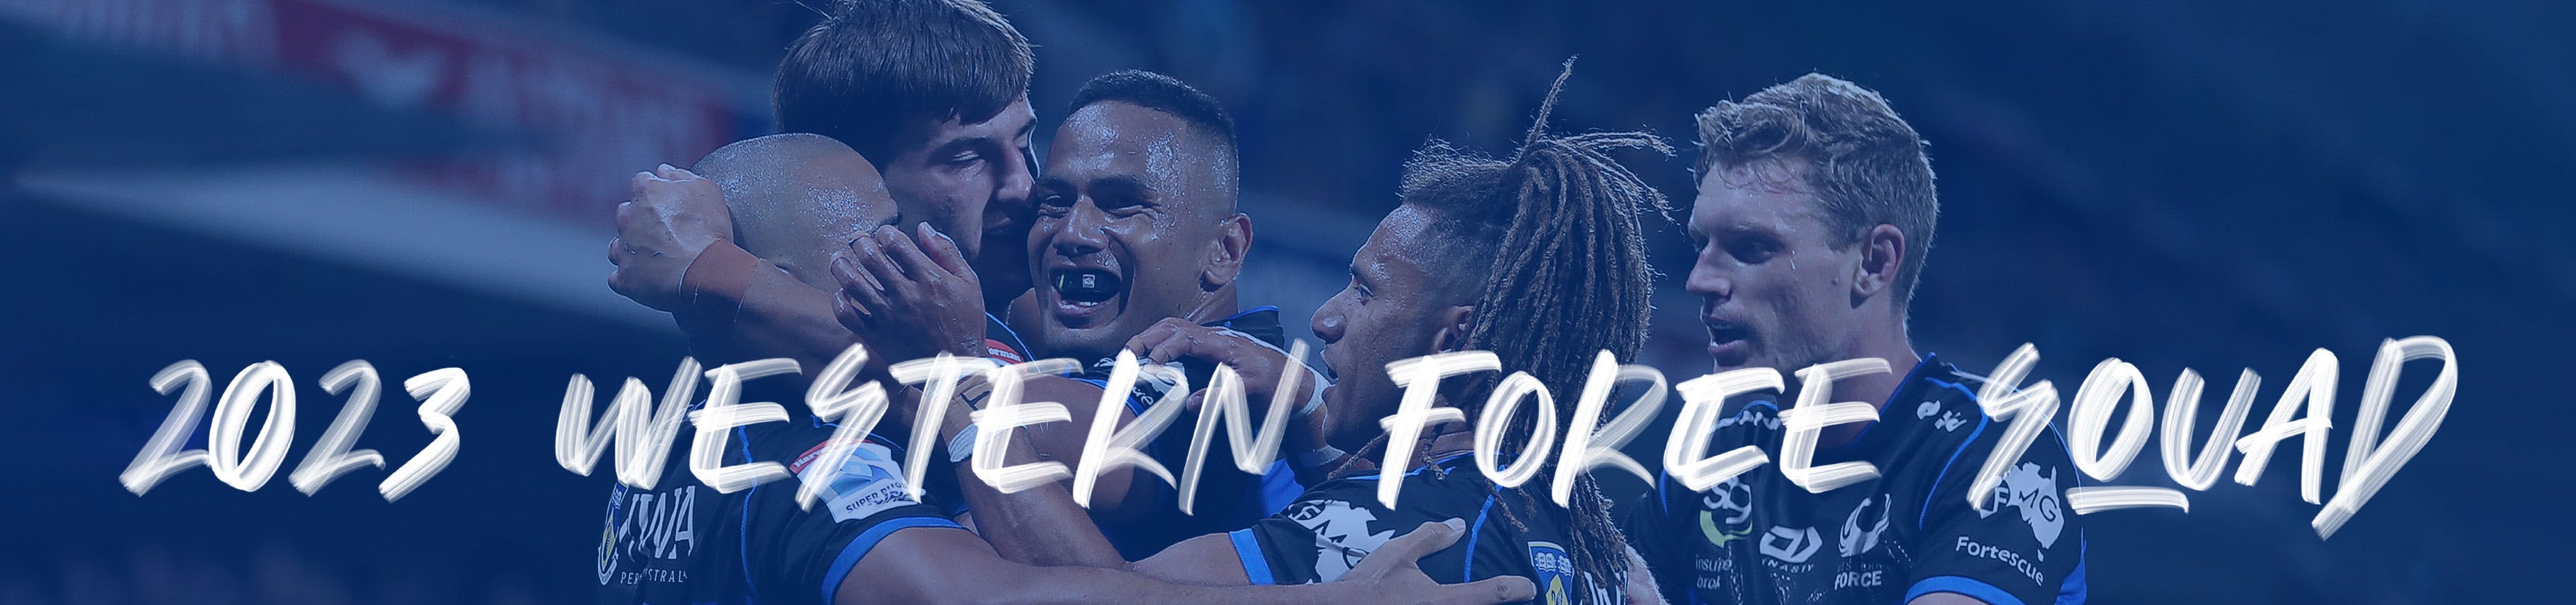 WESTERN FORCE SQUAD BANNER